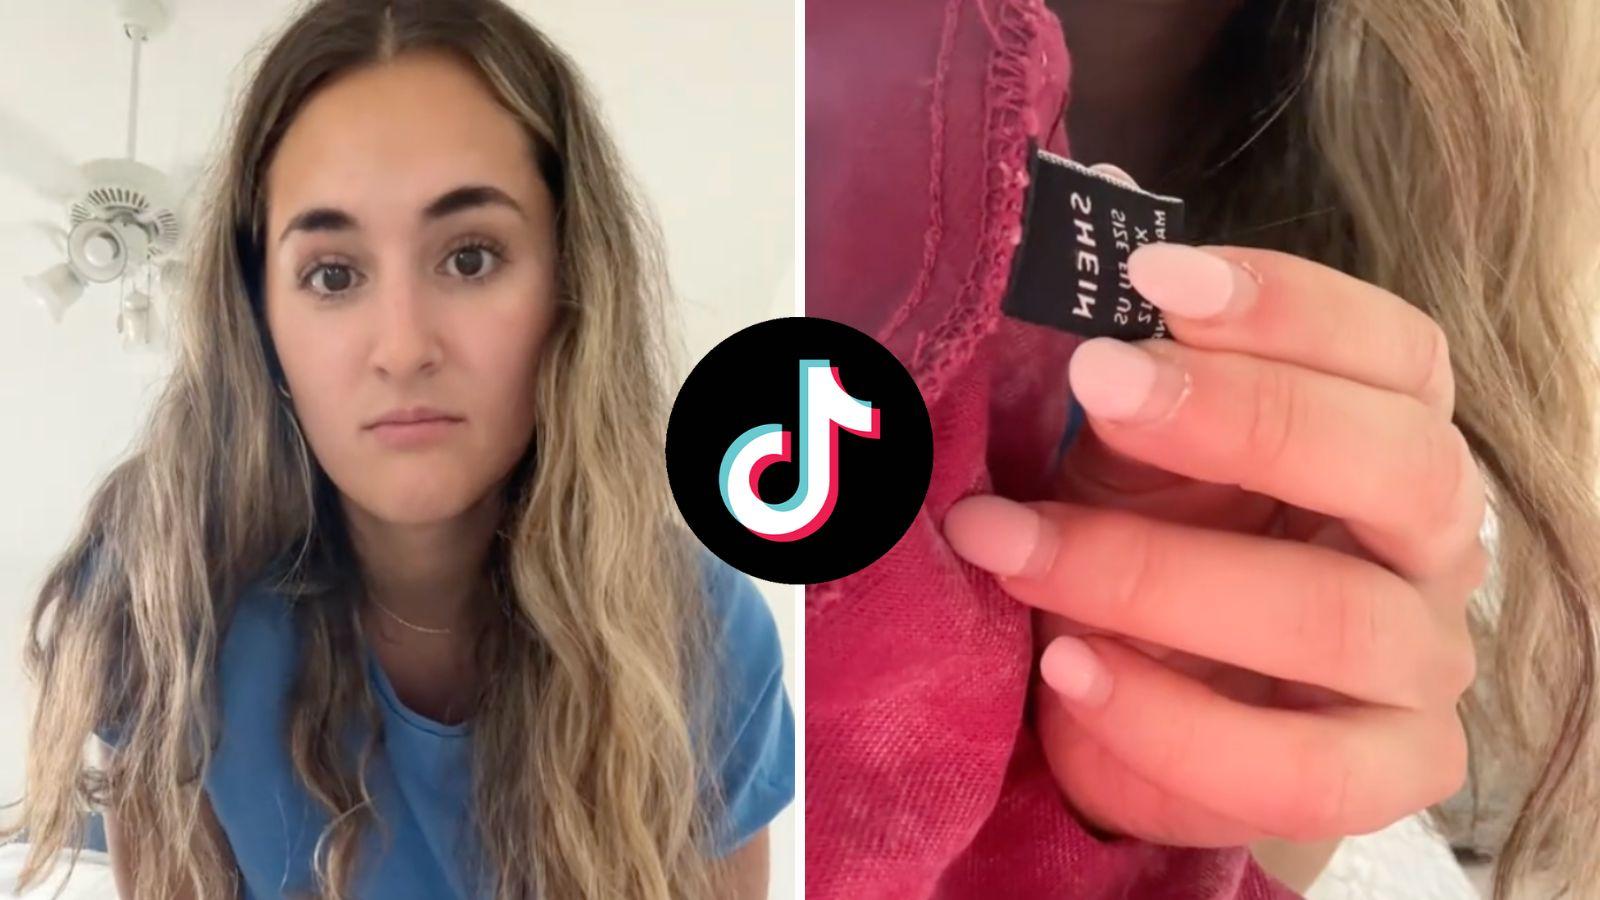 Woman baffled after finding SHEIN tag on $83 Jaded London top